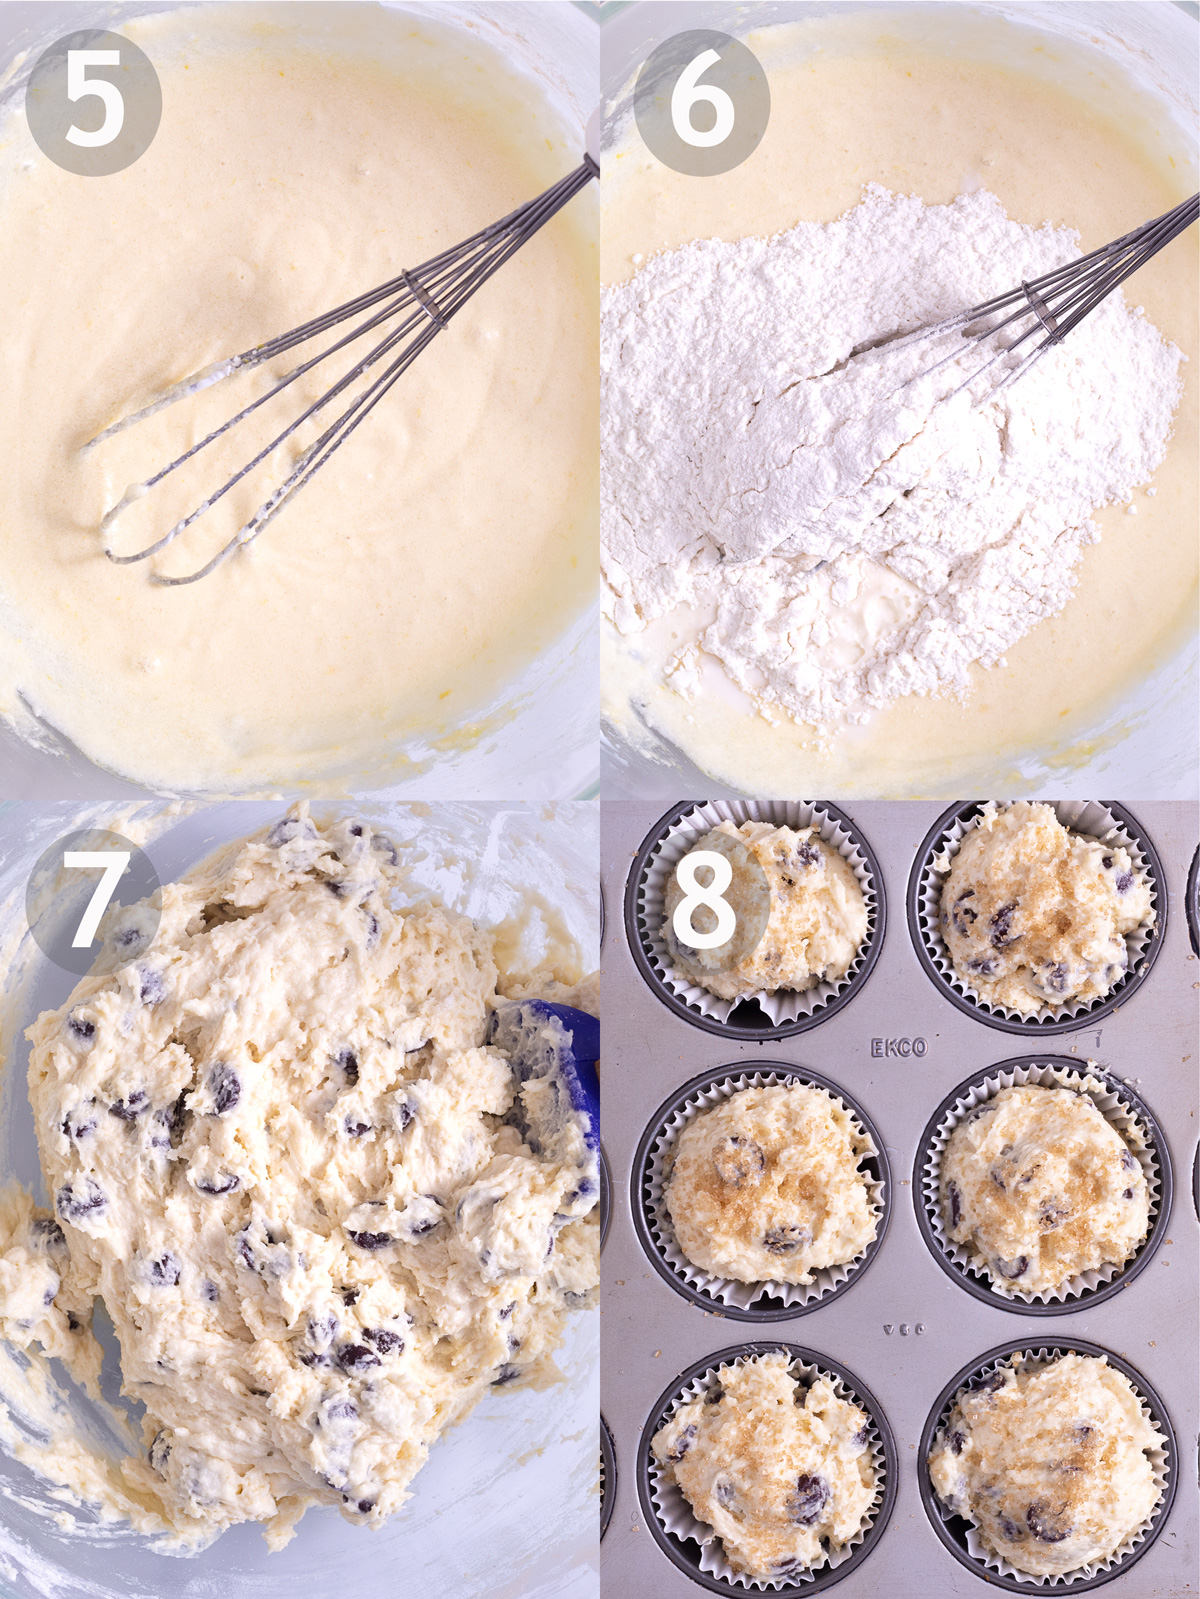 Last 4 steps to make chocolate chip muffins including, mixing all wet ingredients, adding dry ingredients and chocolate chip and scooping batter into baking tin.